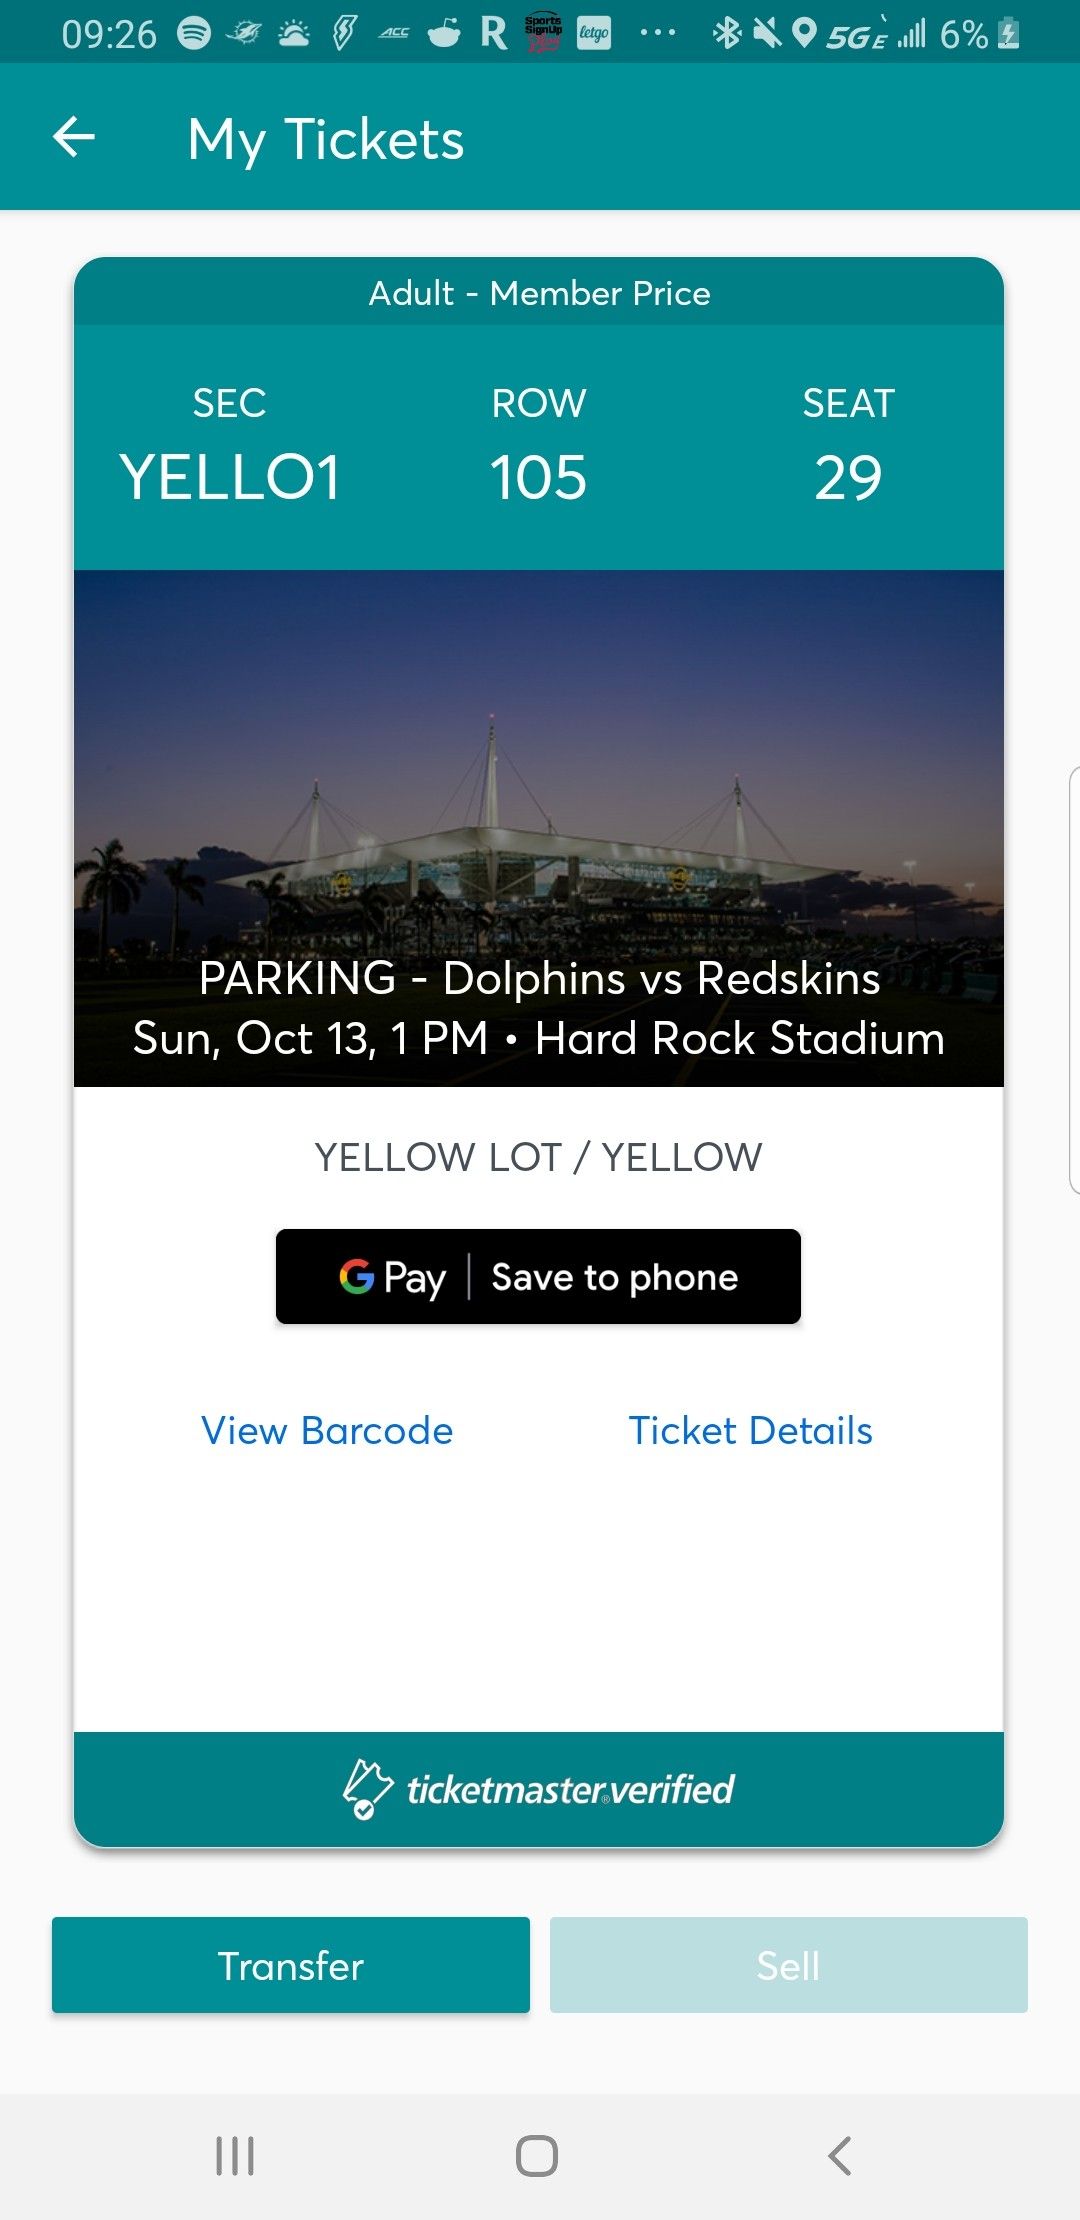 Dolphins vs Redskins parking pass